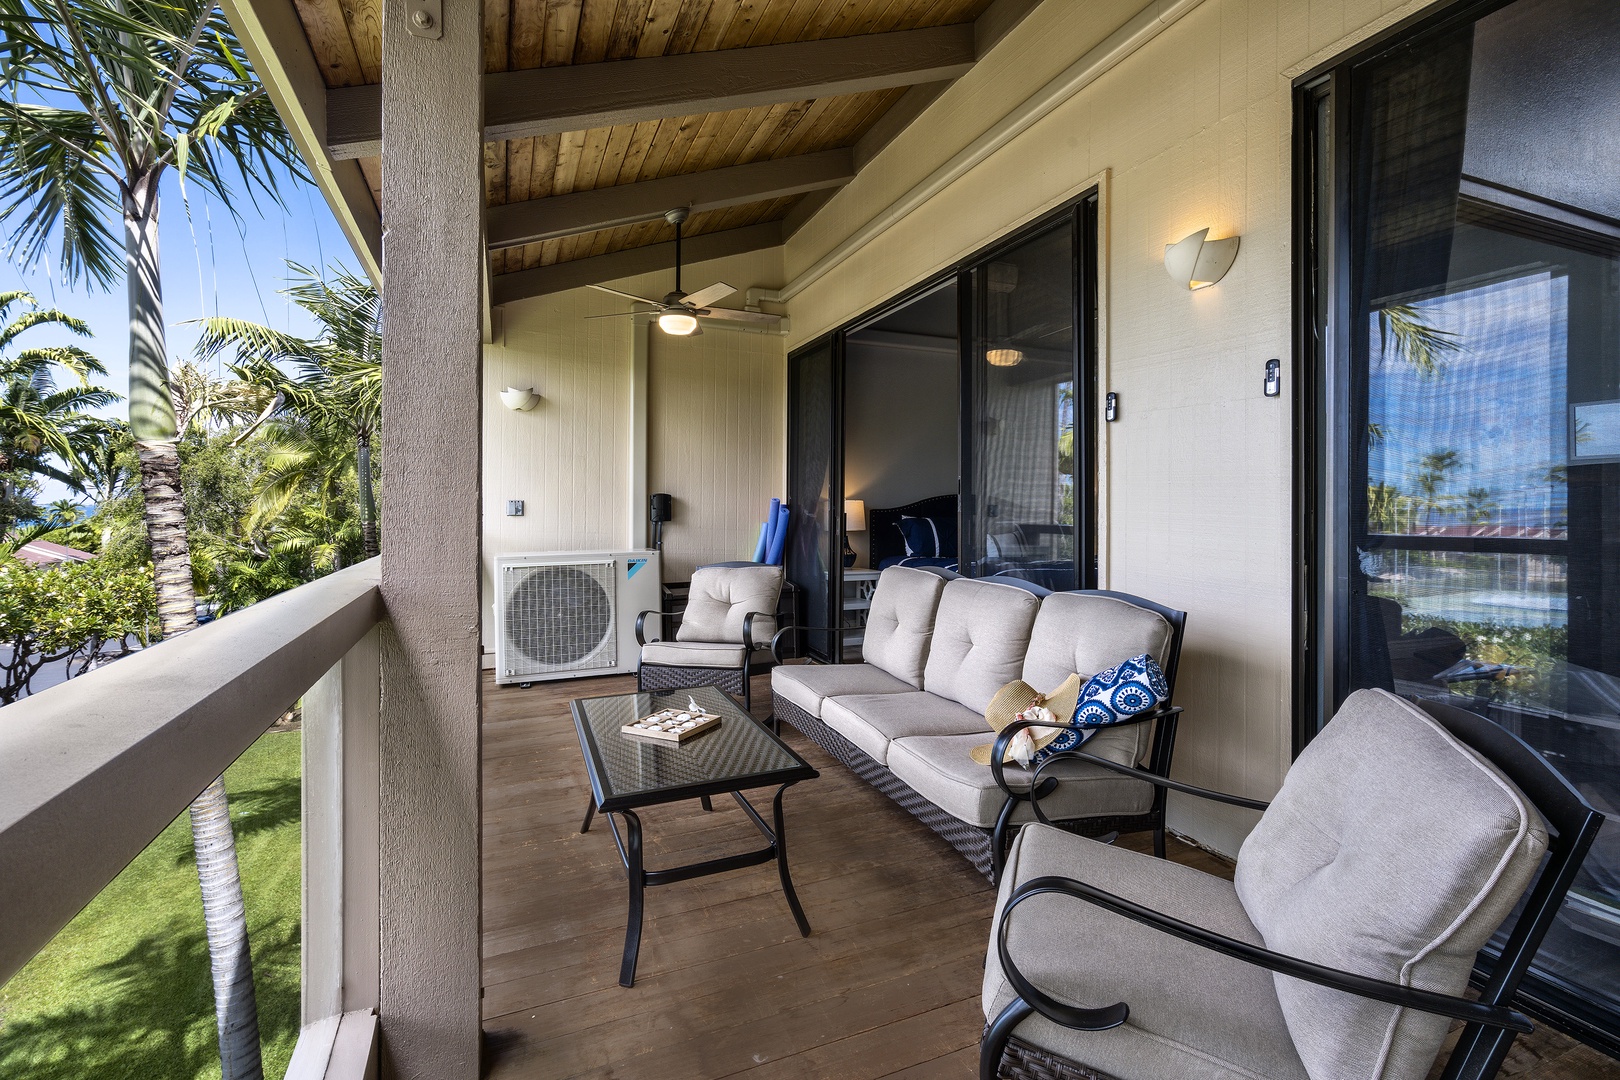 Kailua Kona Vacation Rentals, Keauhou Kona Surf & Racquet 9303 - Relax and enjoy your coffee and take in all Hawaii has to offer